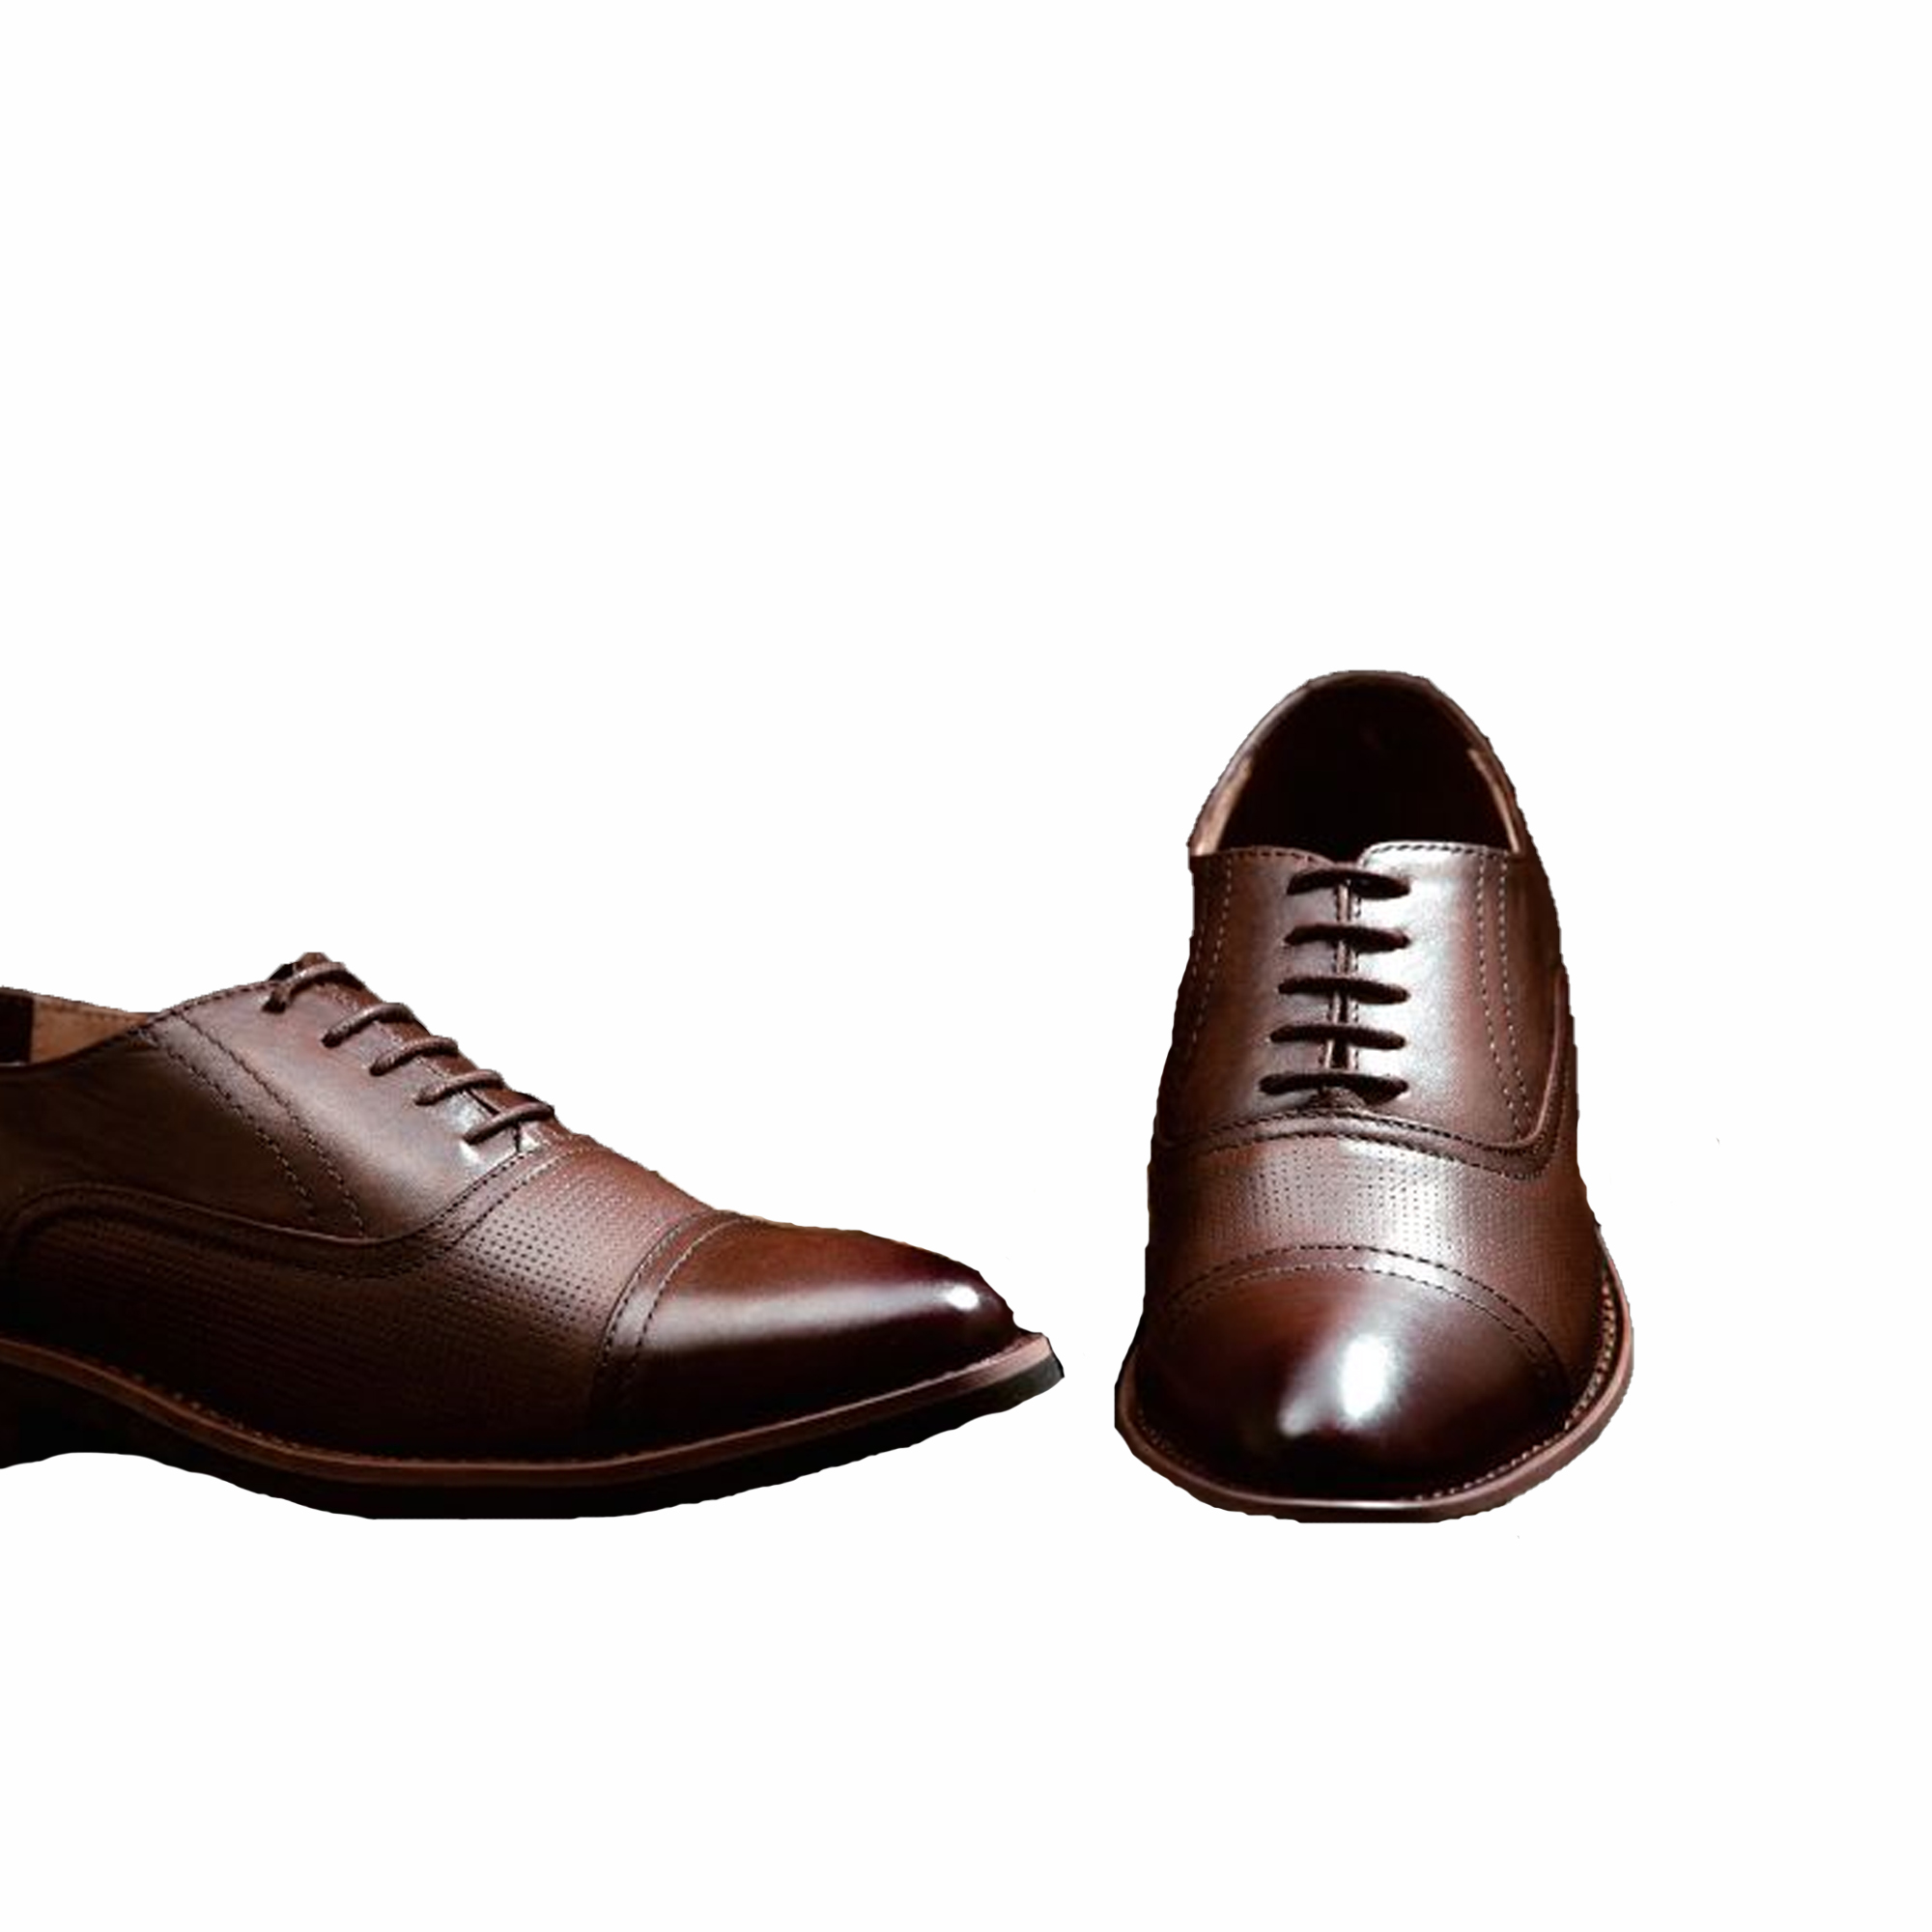 Tan Oxford Leather Shoes - Republic Leather 